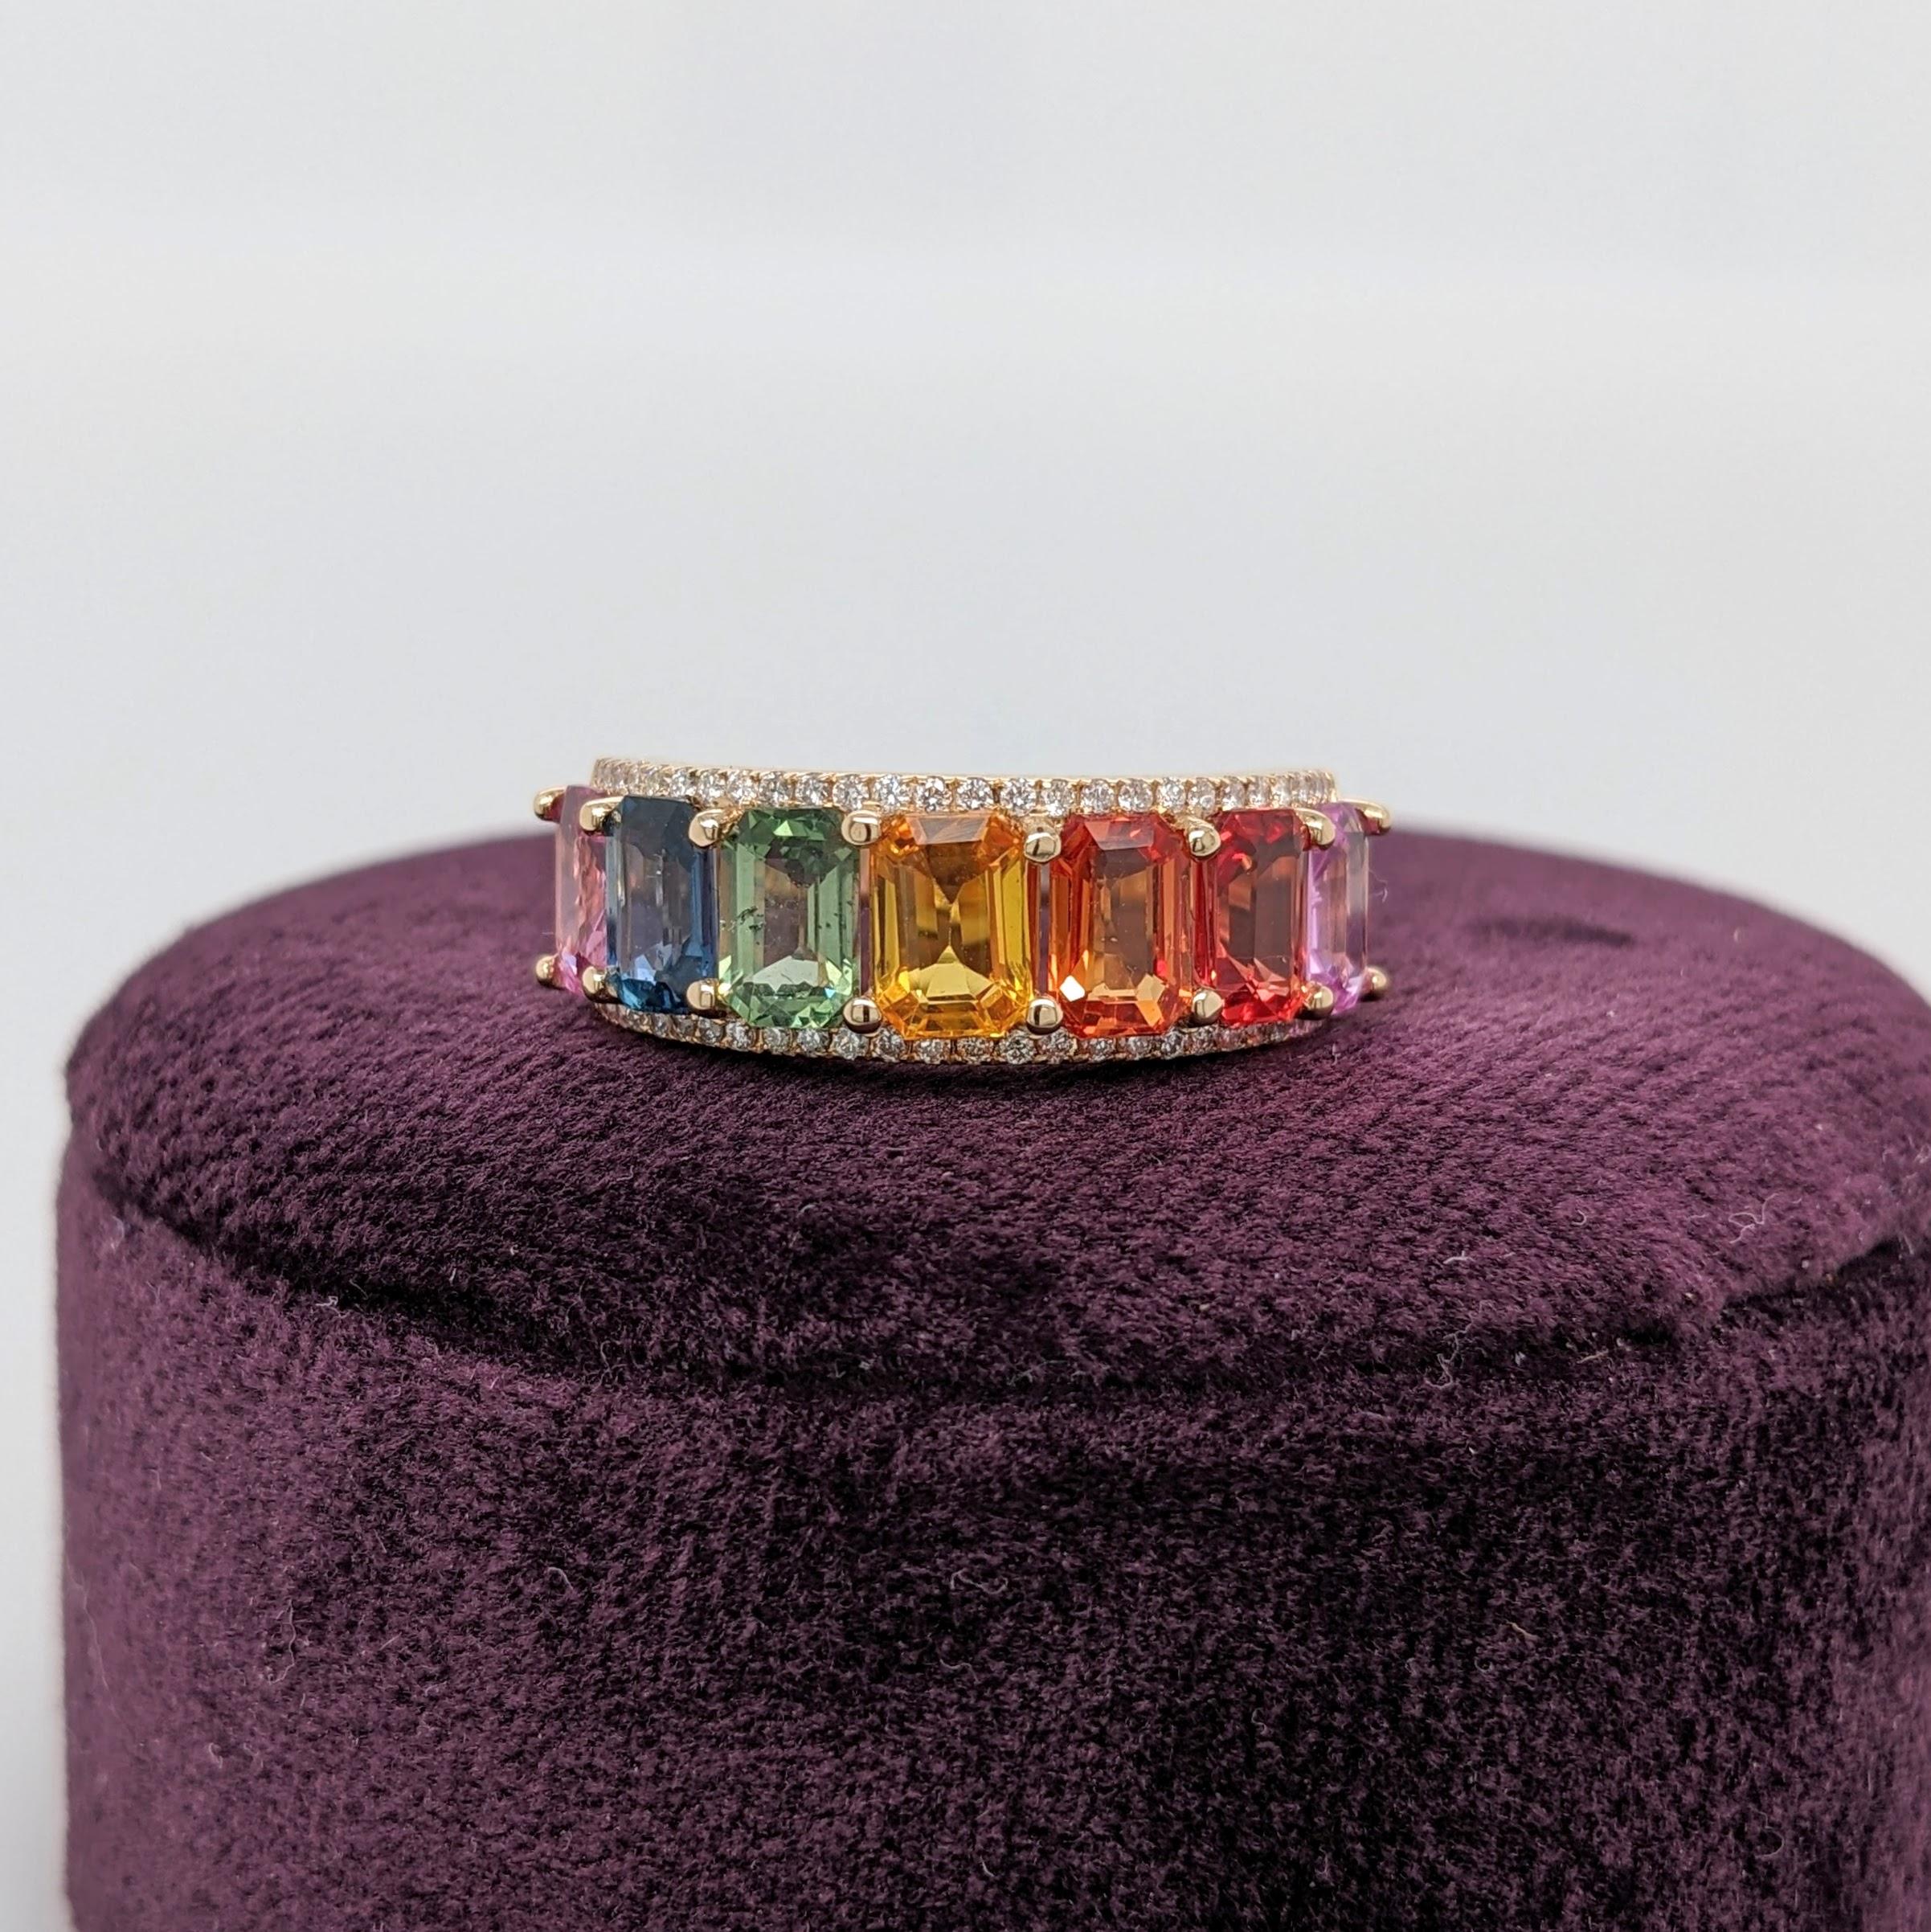 8.6ct Rainbow Sapphire w Diamond Accents in Solid 14k Gold Emerald Cut 5x4mm For Sale 3